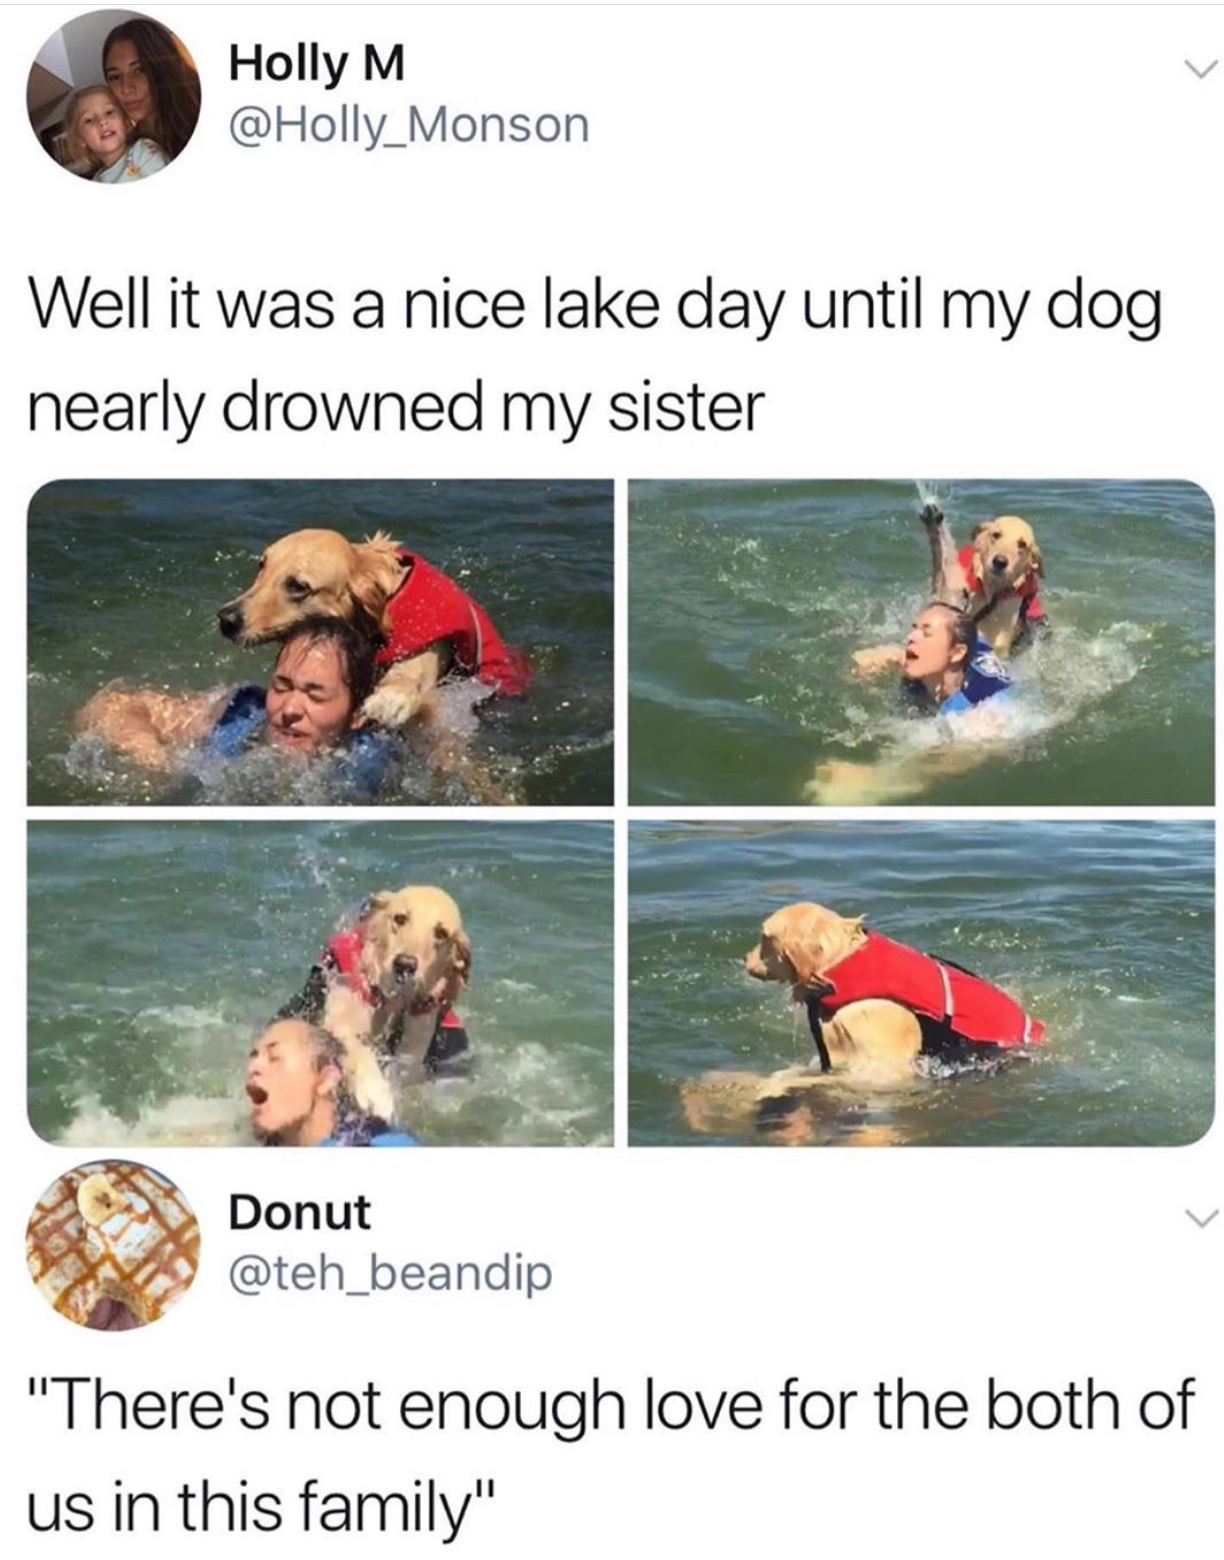 memes guaranteed to make you laugh - Holly M Well it was a nice lake day until my dog nearly drowned my sister Donut "There's not enough love for the both of us in this family"